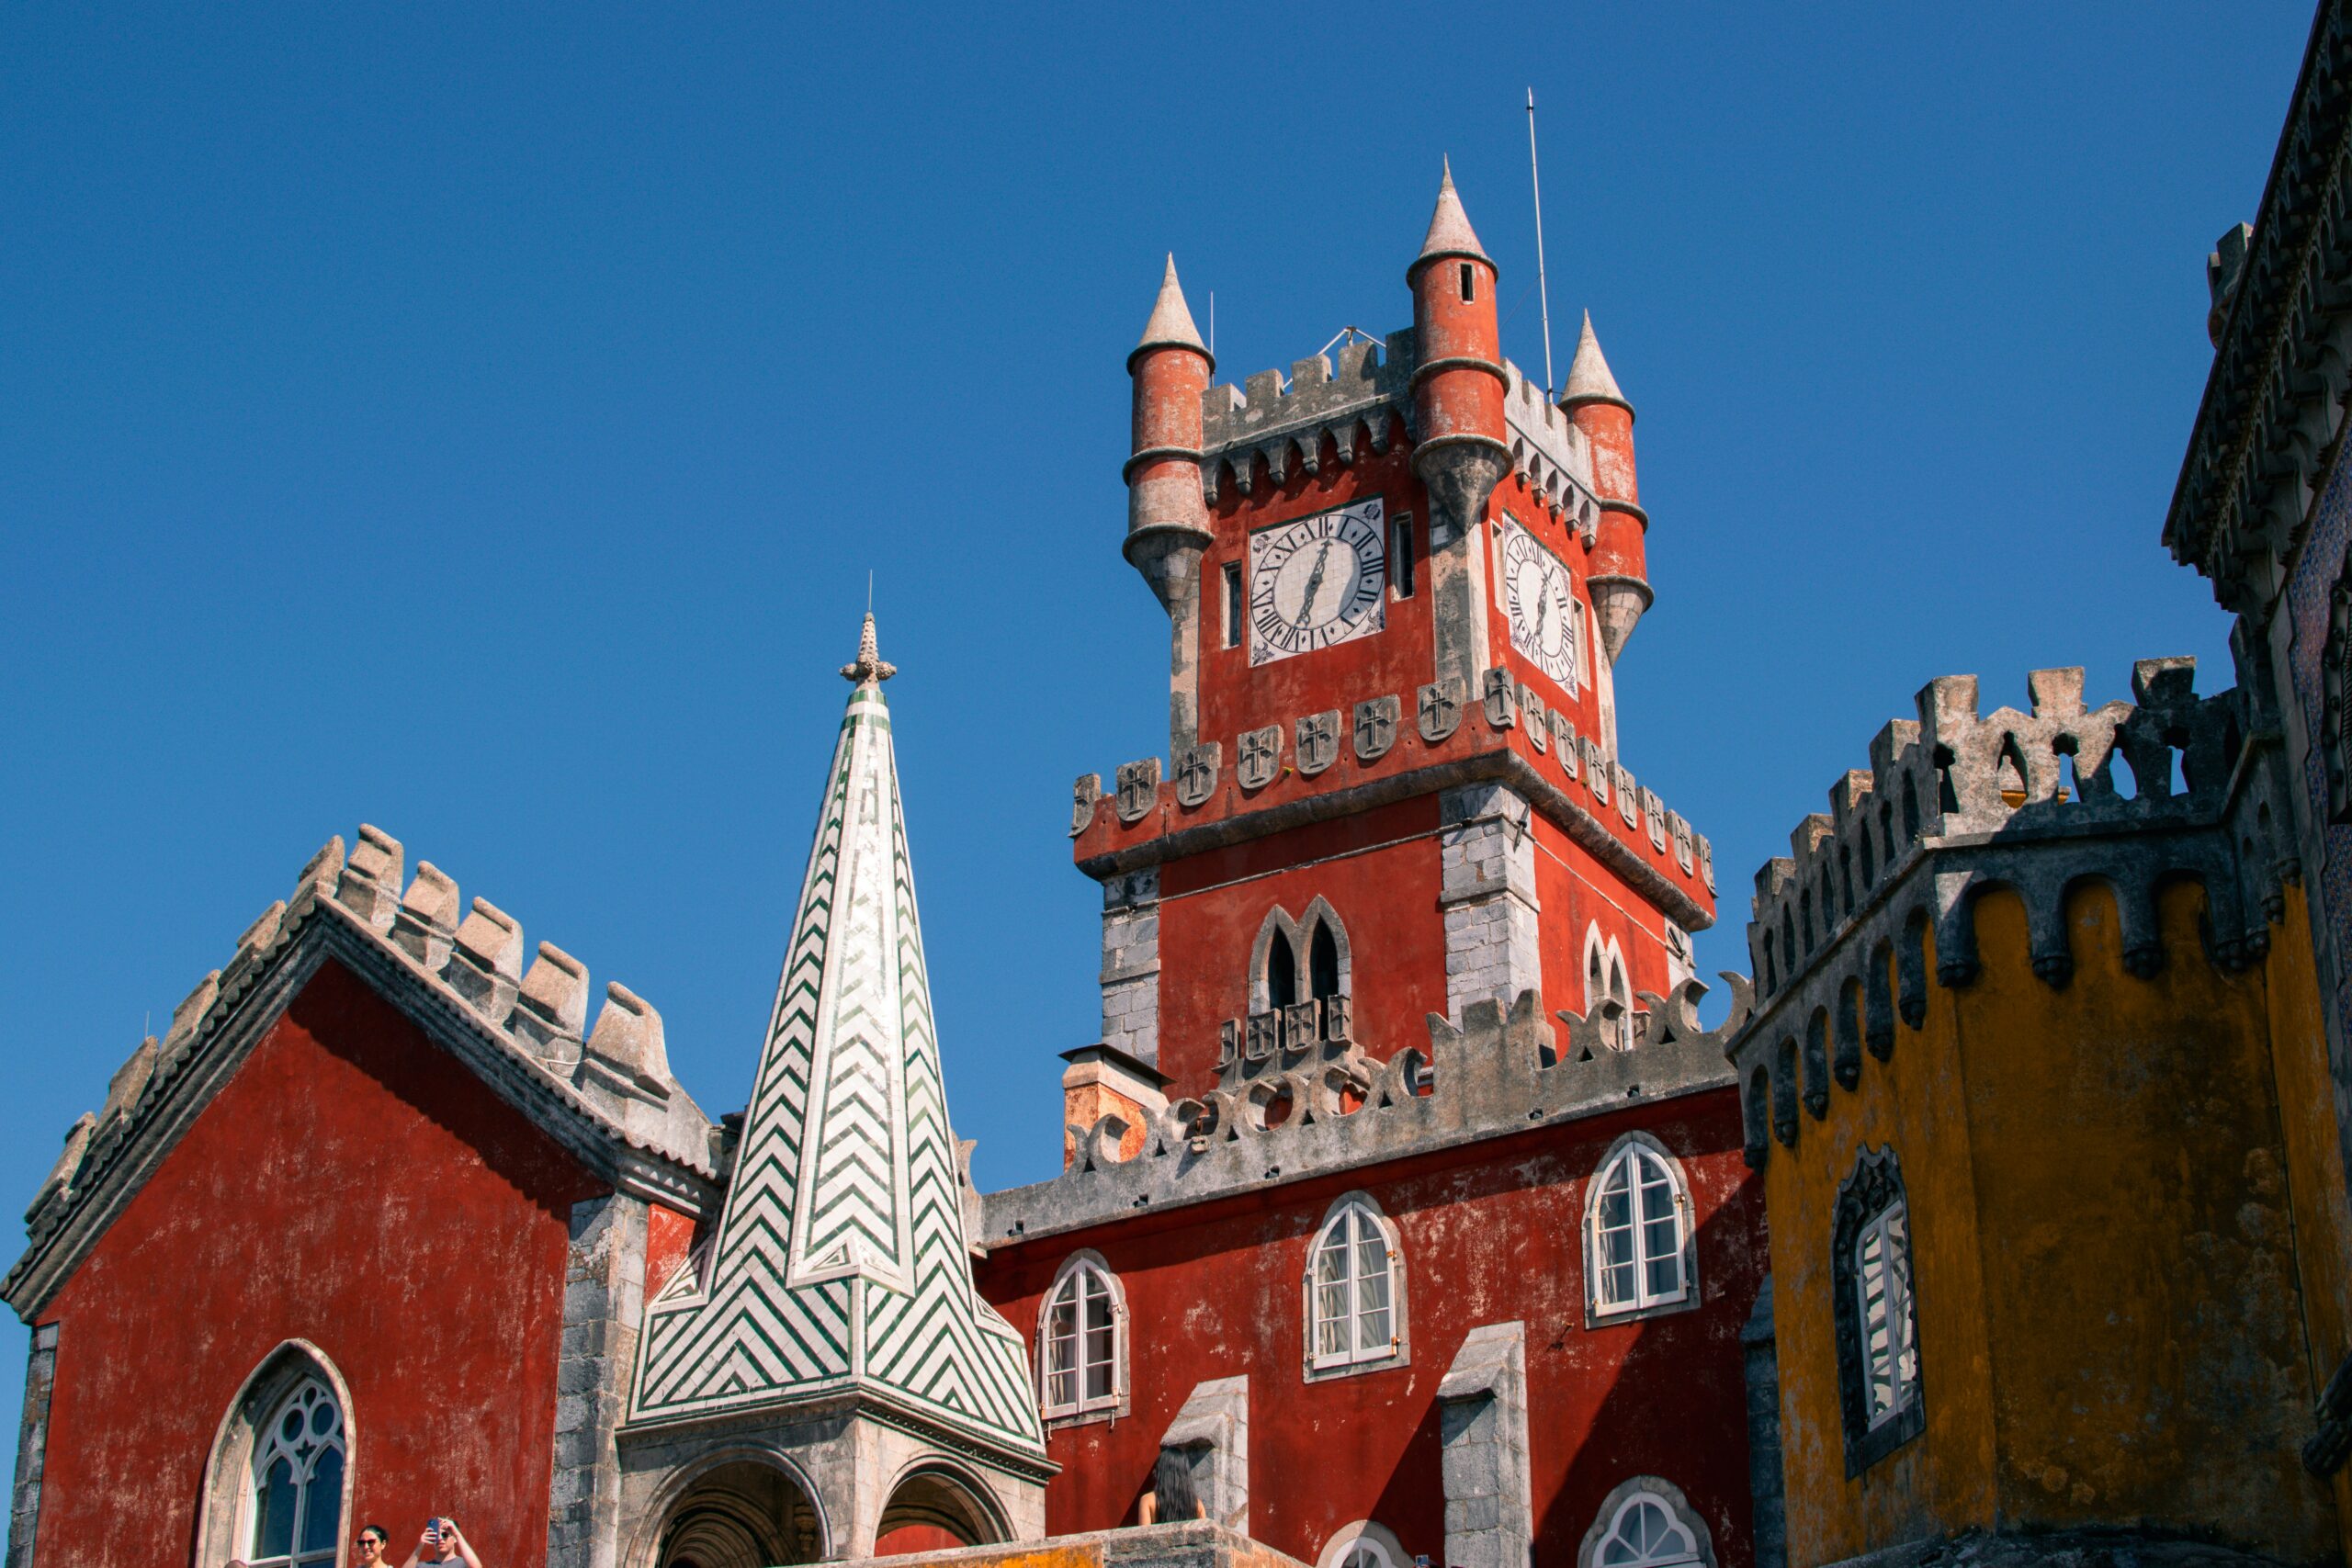 The Red clock tower of Pena Palace